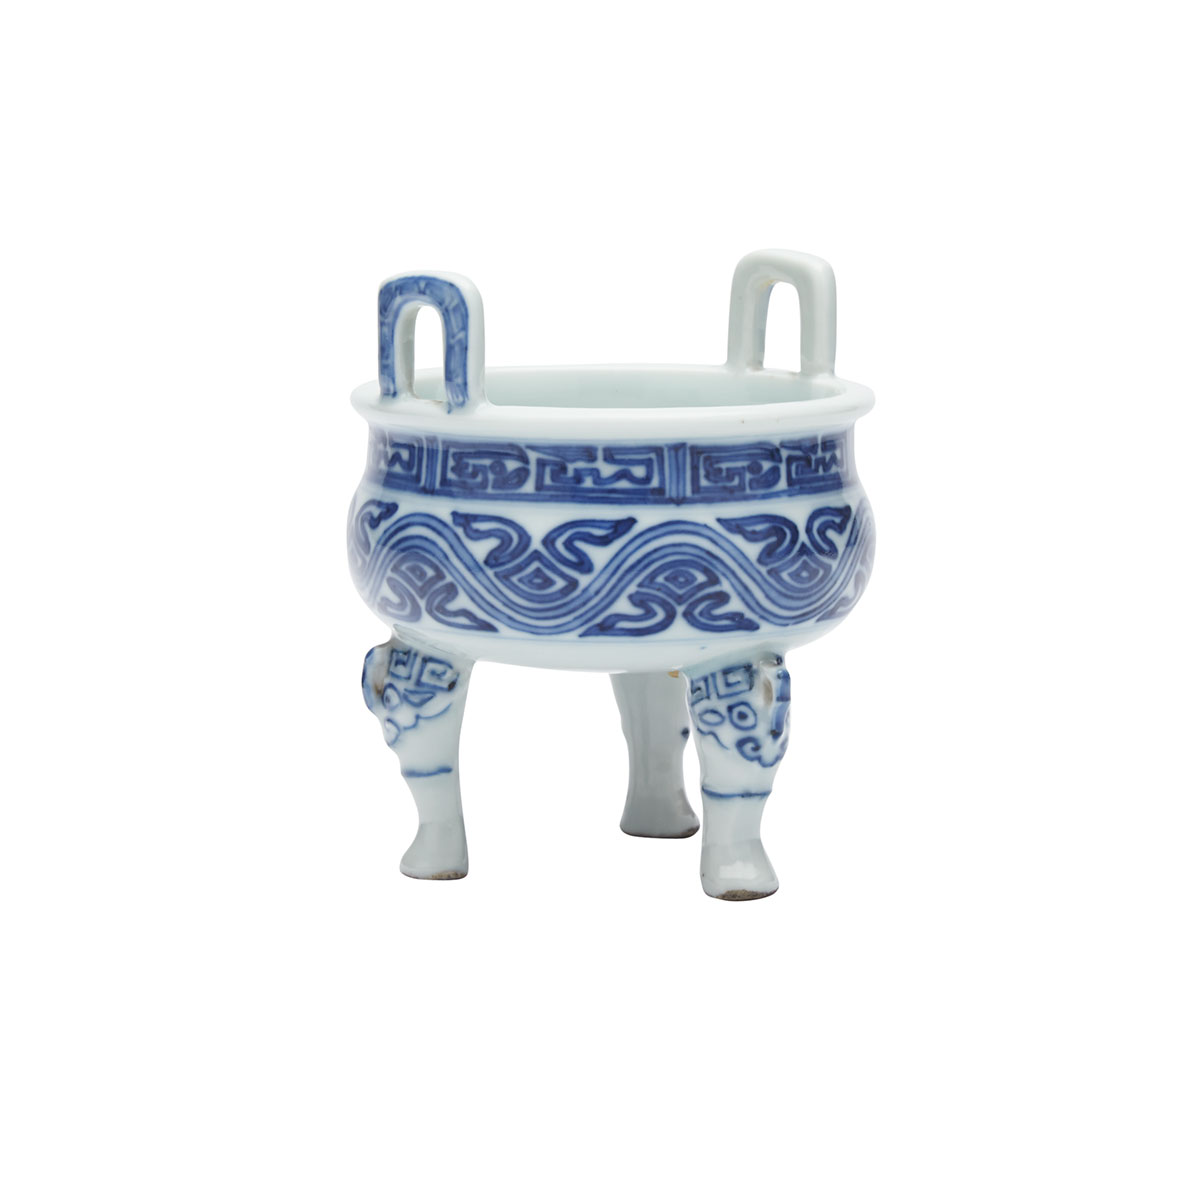 Blue and White Tripod Vessel, Qianlong Mark and Probably of the Period (1736-1795)